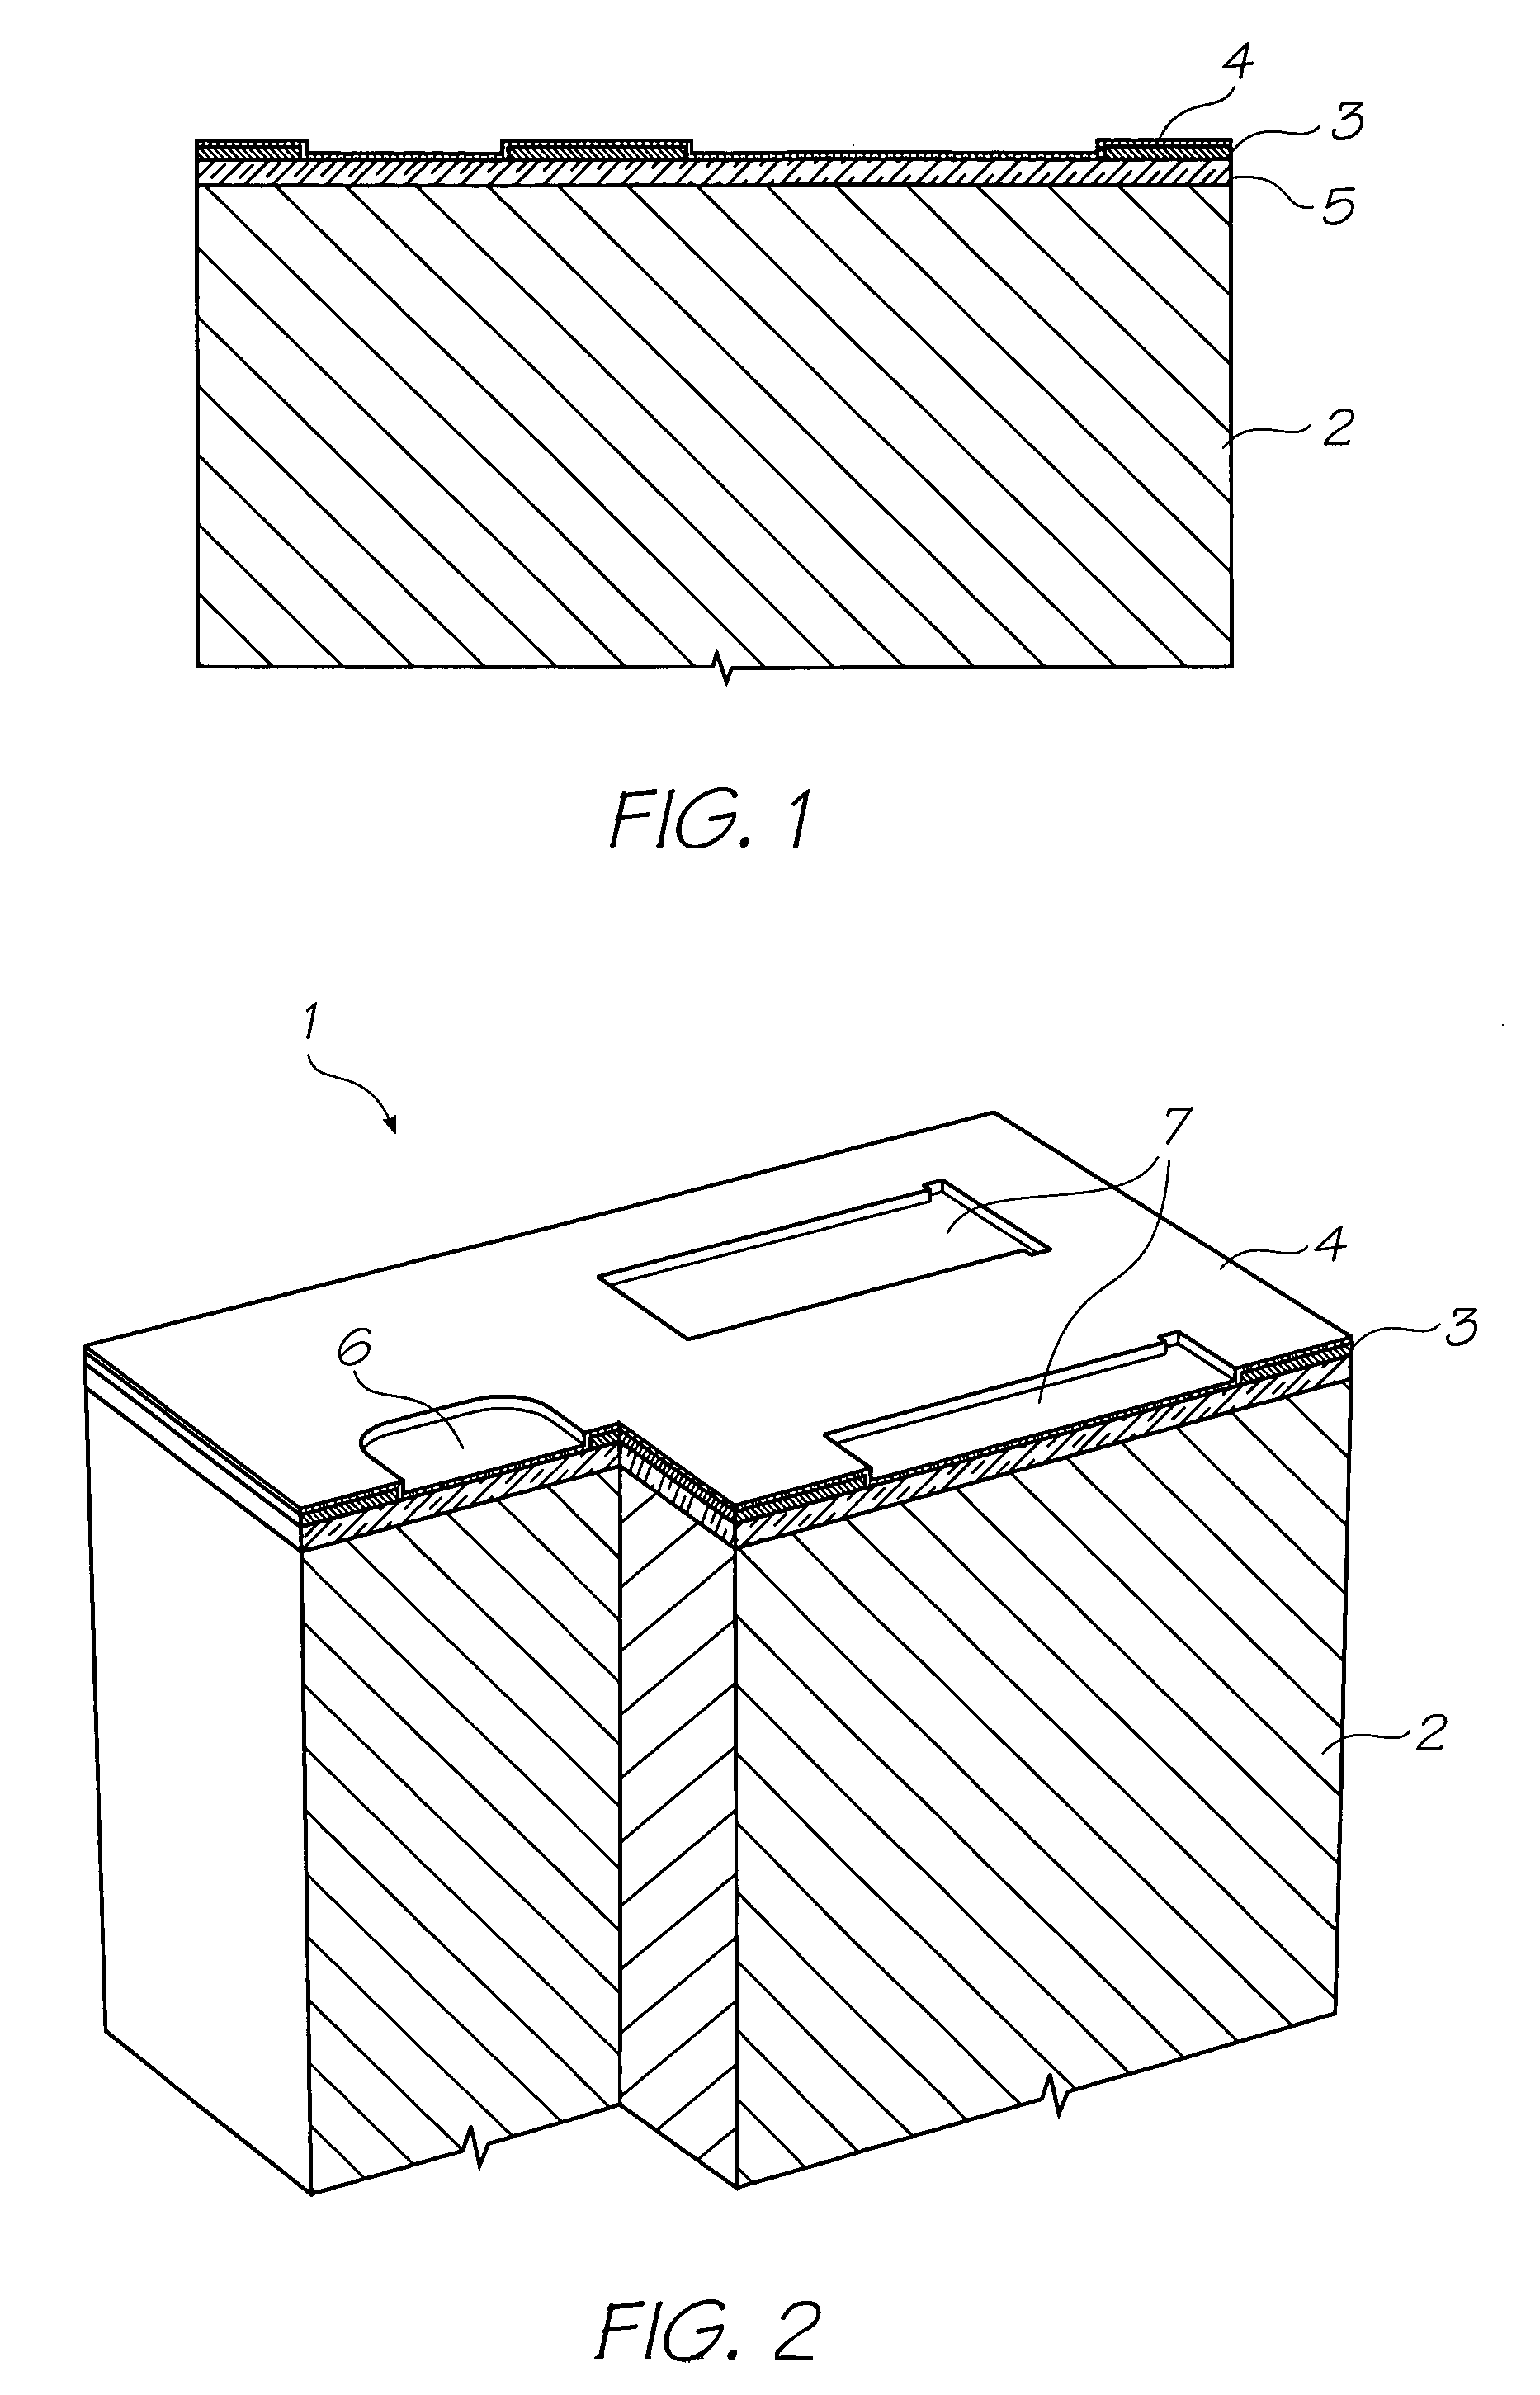 Method of fabricating suspended beam in a MEMS process